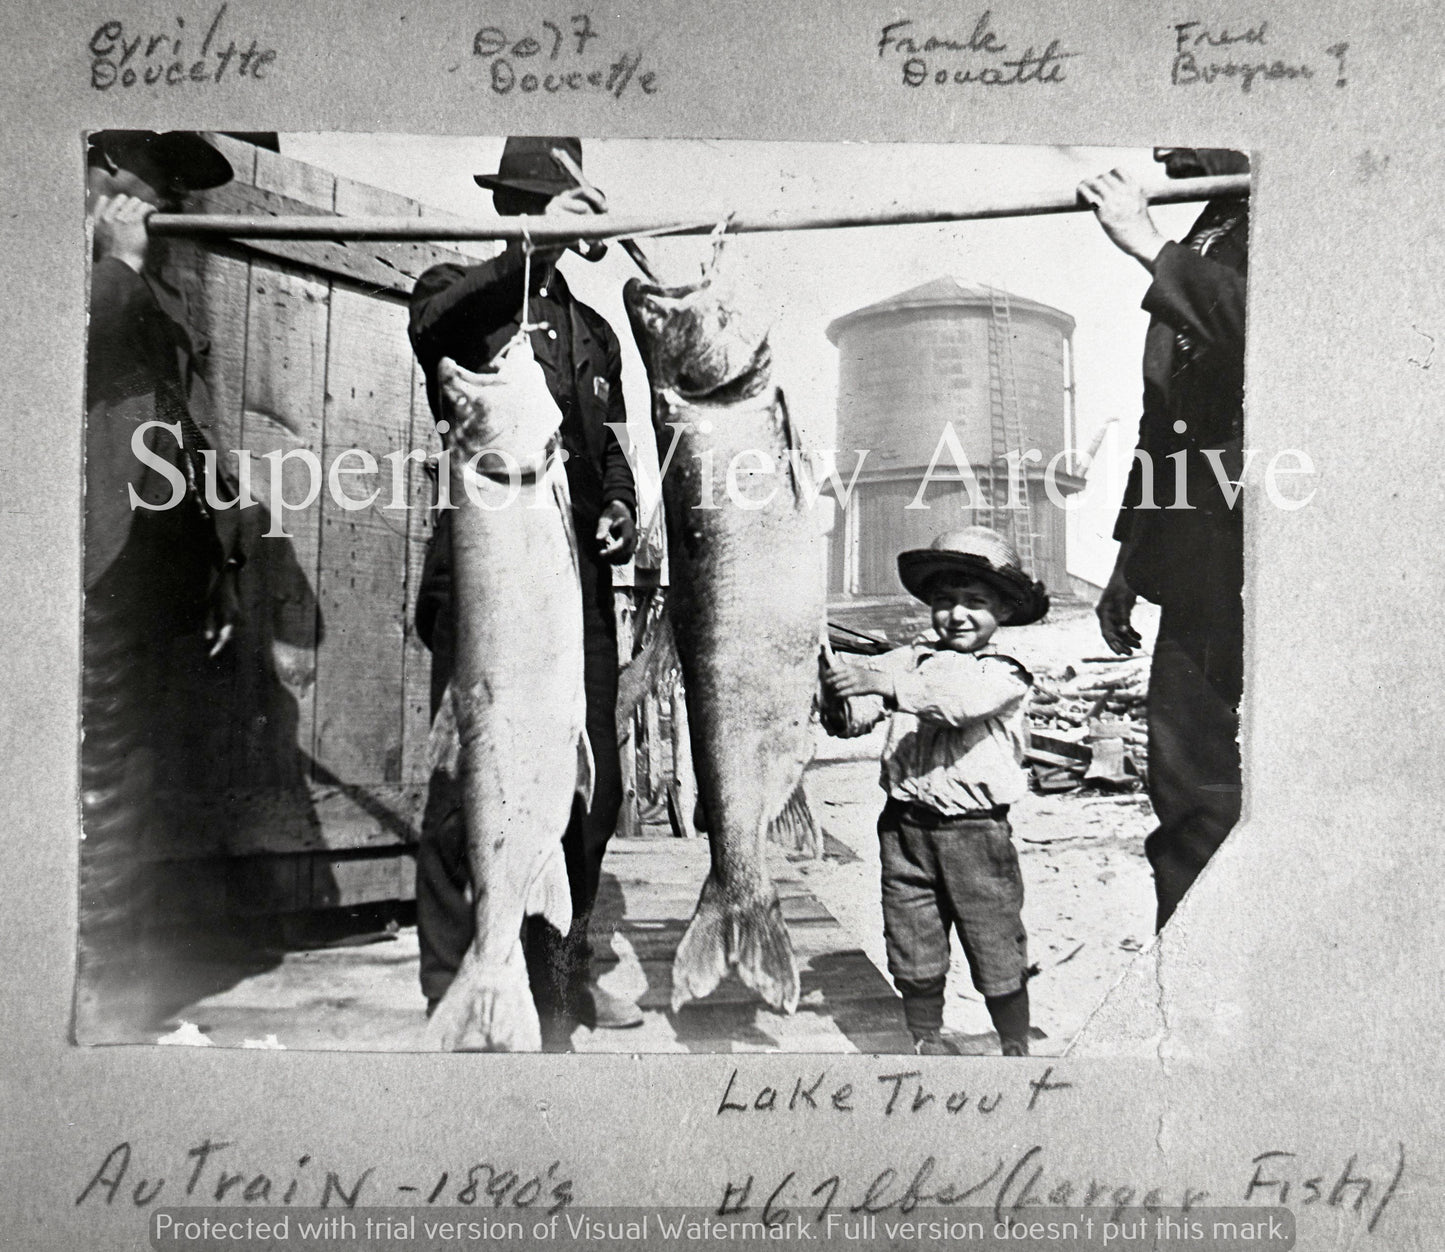 Old Time Fishing Record 65 # Lake Trout Caught on Lake Superior AuTrain MI